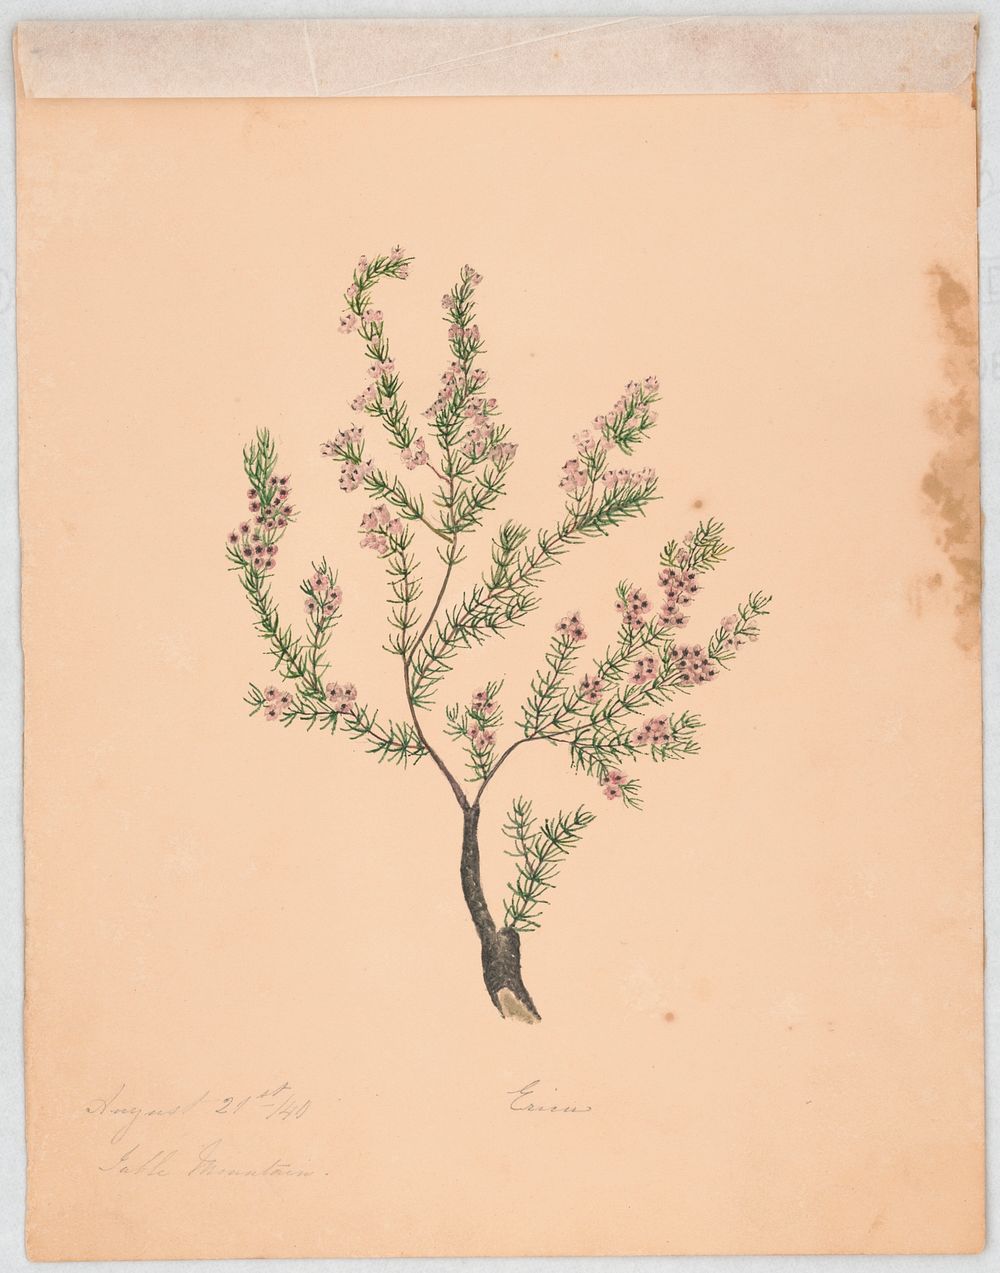 Branch of a shrub with needle-like foliage and small pink blossoms (1840). Original from the Library of Congress.